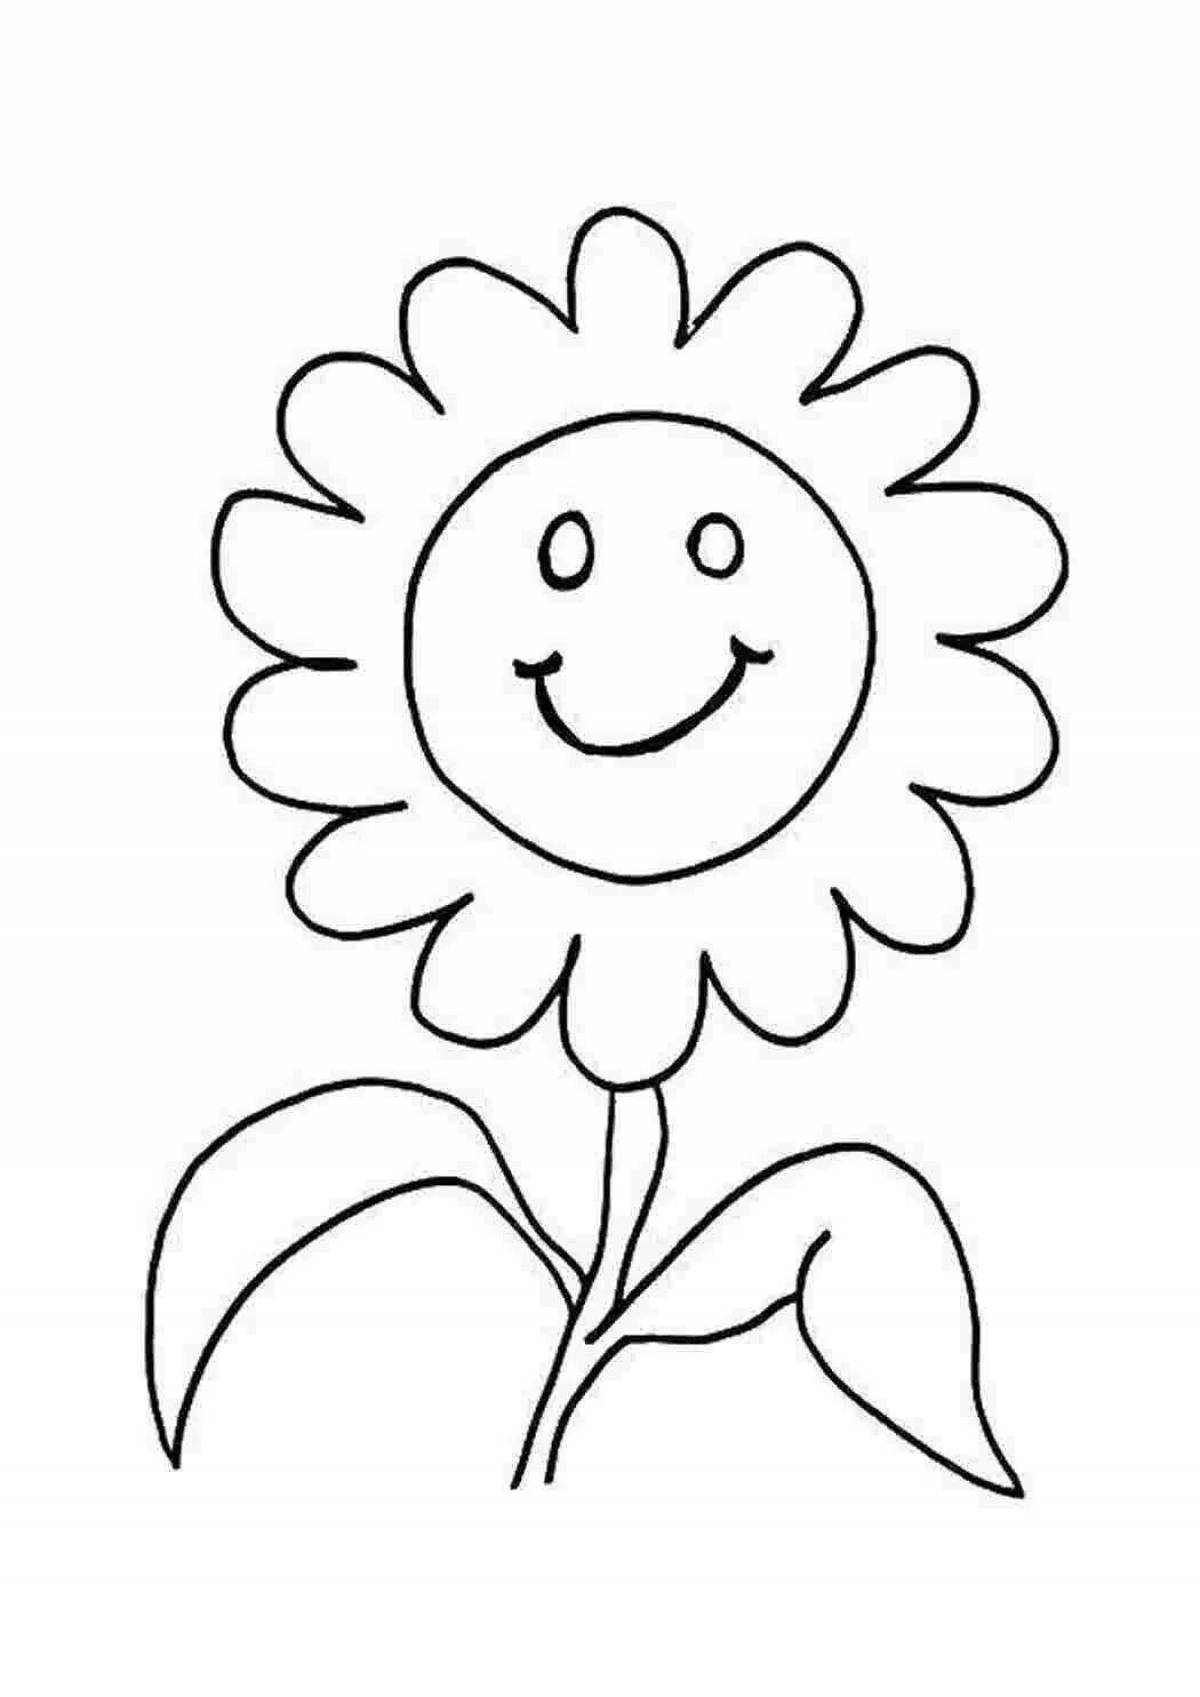 Happy flower coloring page